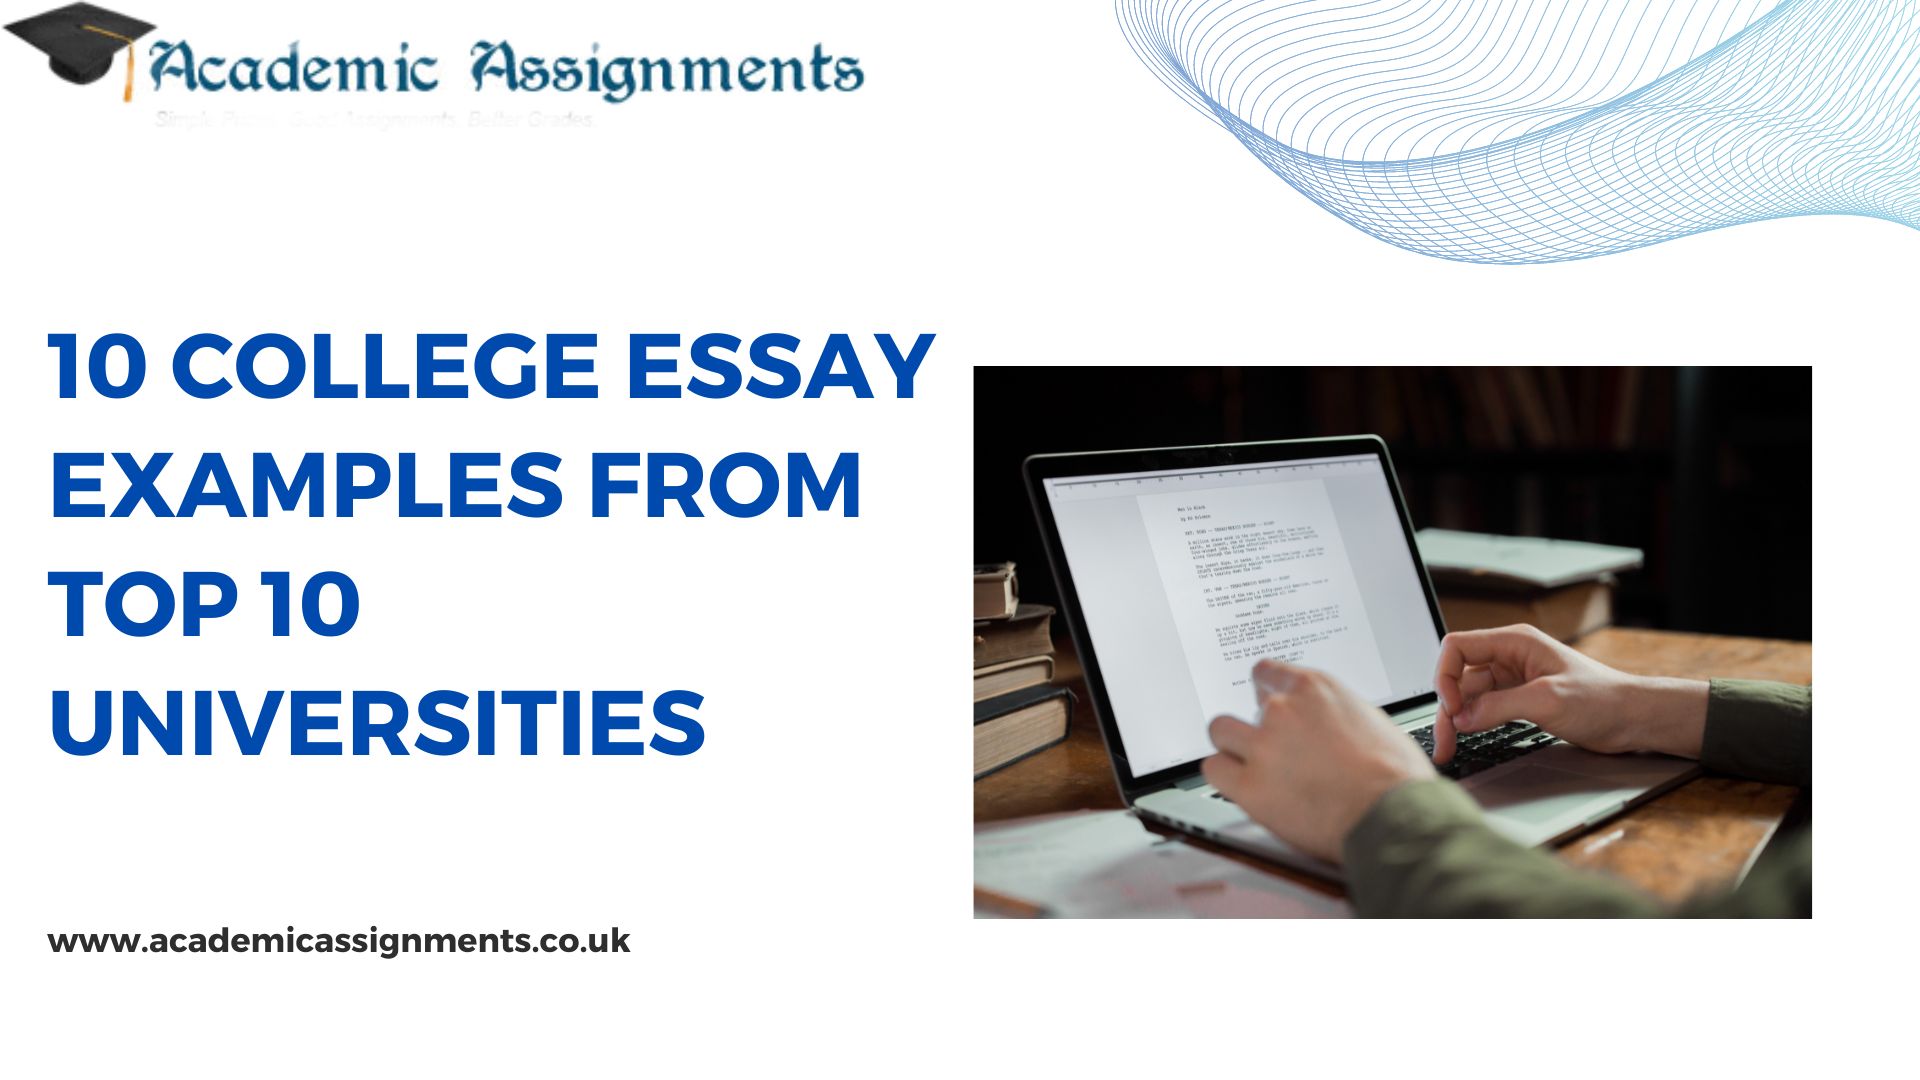 universities that require an essay